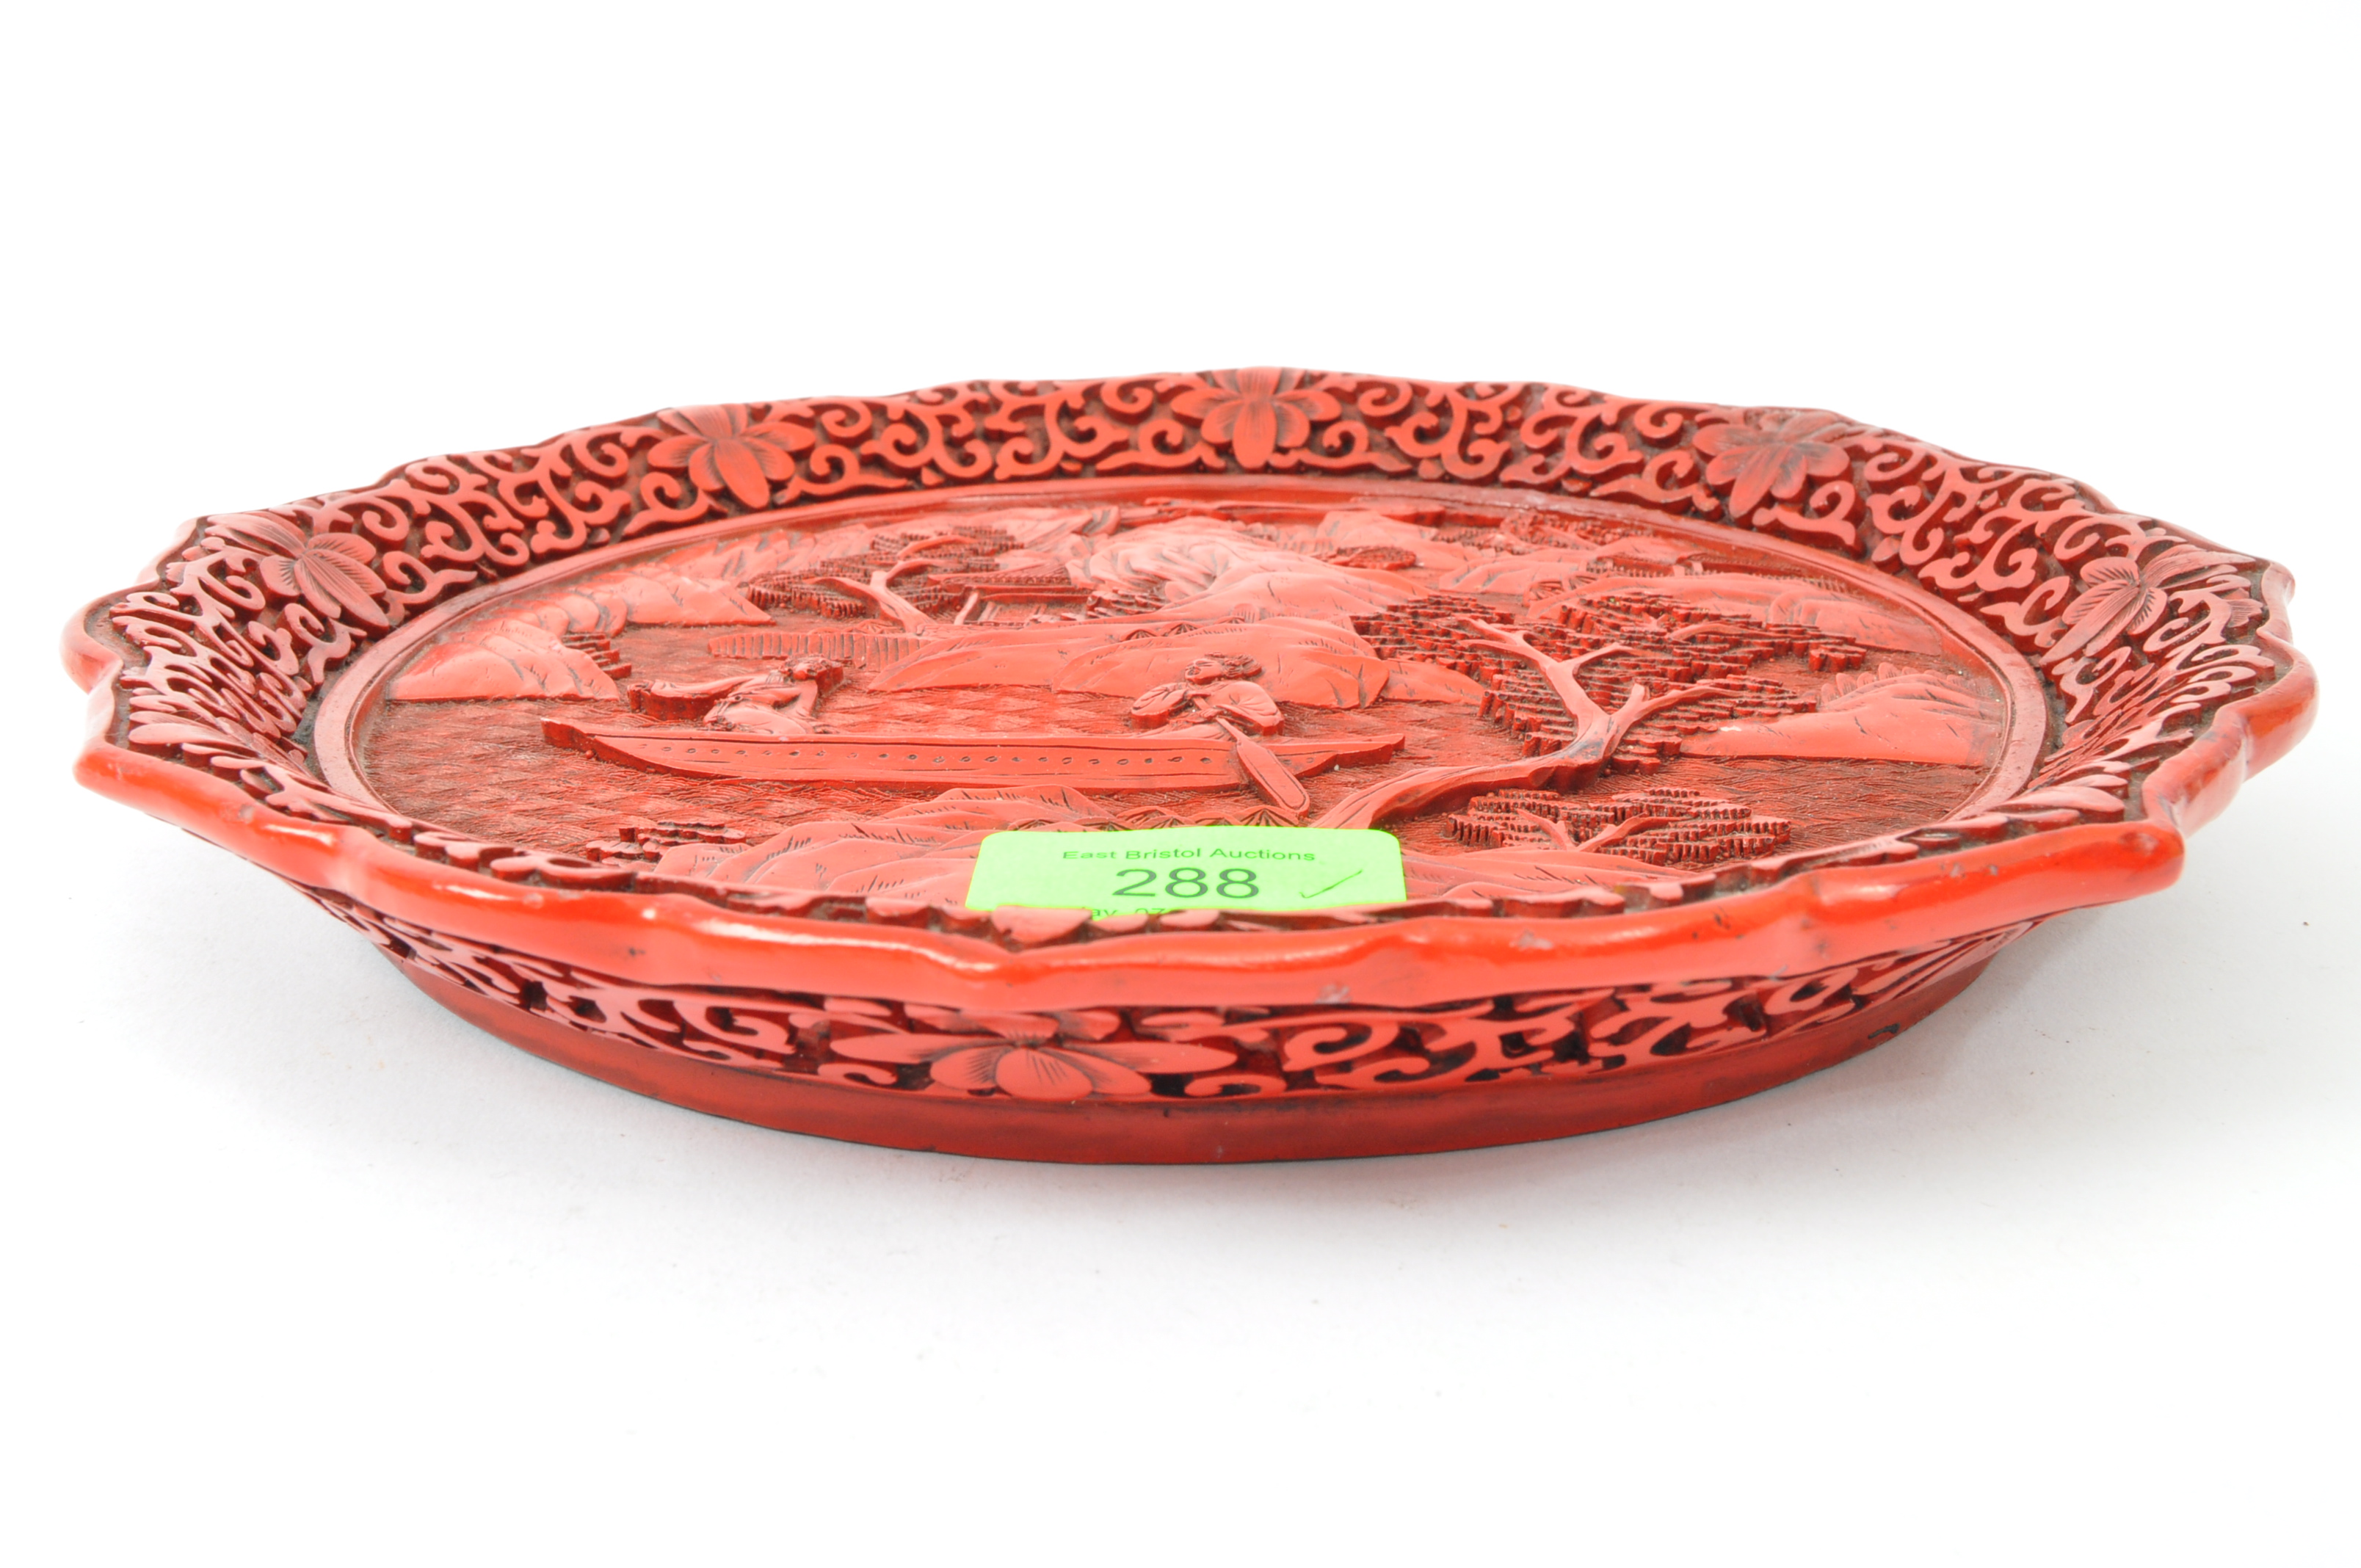 EARLY 20TH CENTURY CHINESE CARVED CINNABAR PLATE - Image 3 of 5